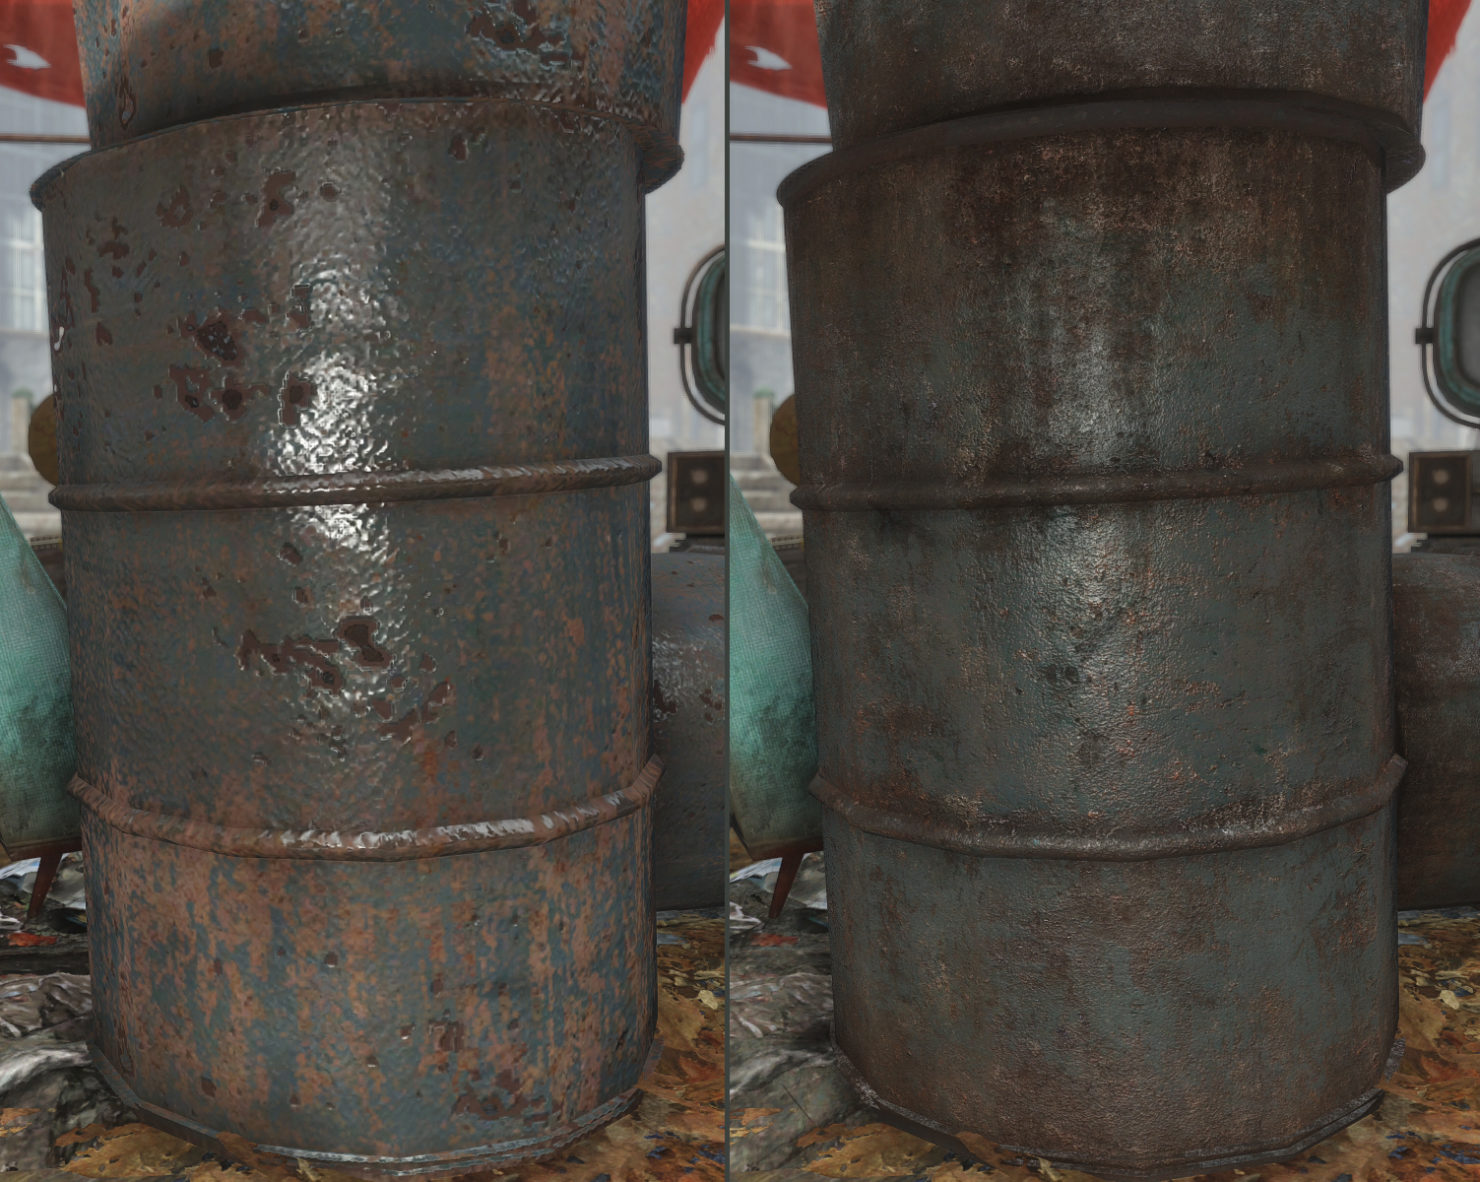 Fallout 4 high resolution texture pack comparison фото 27